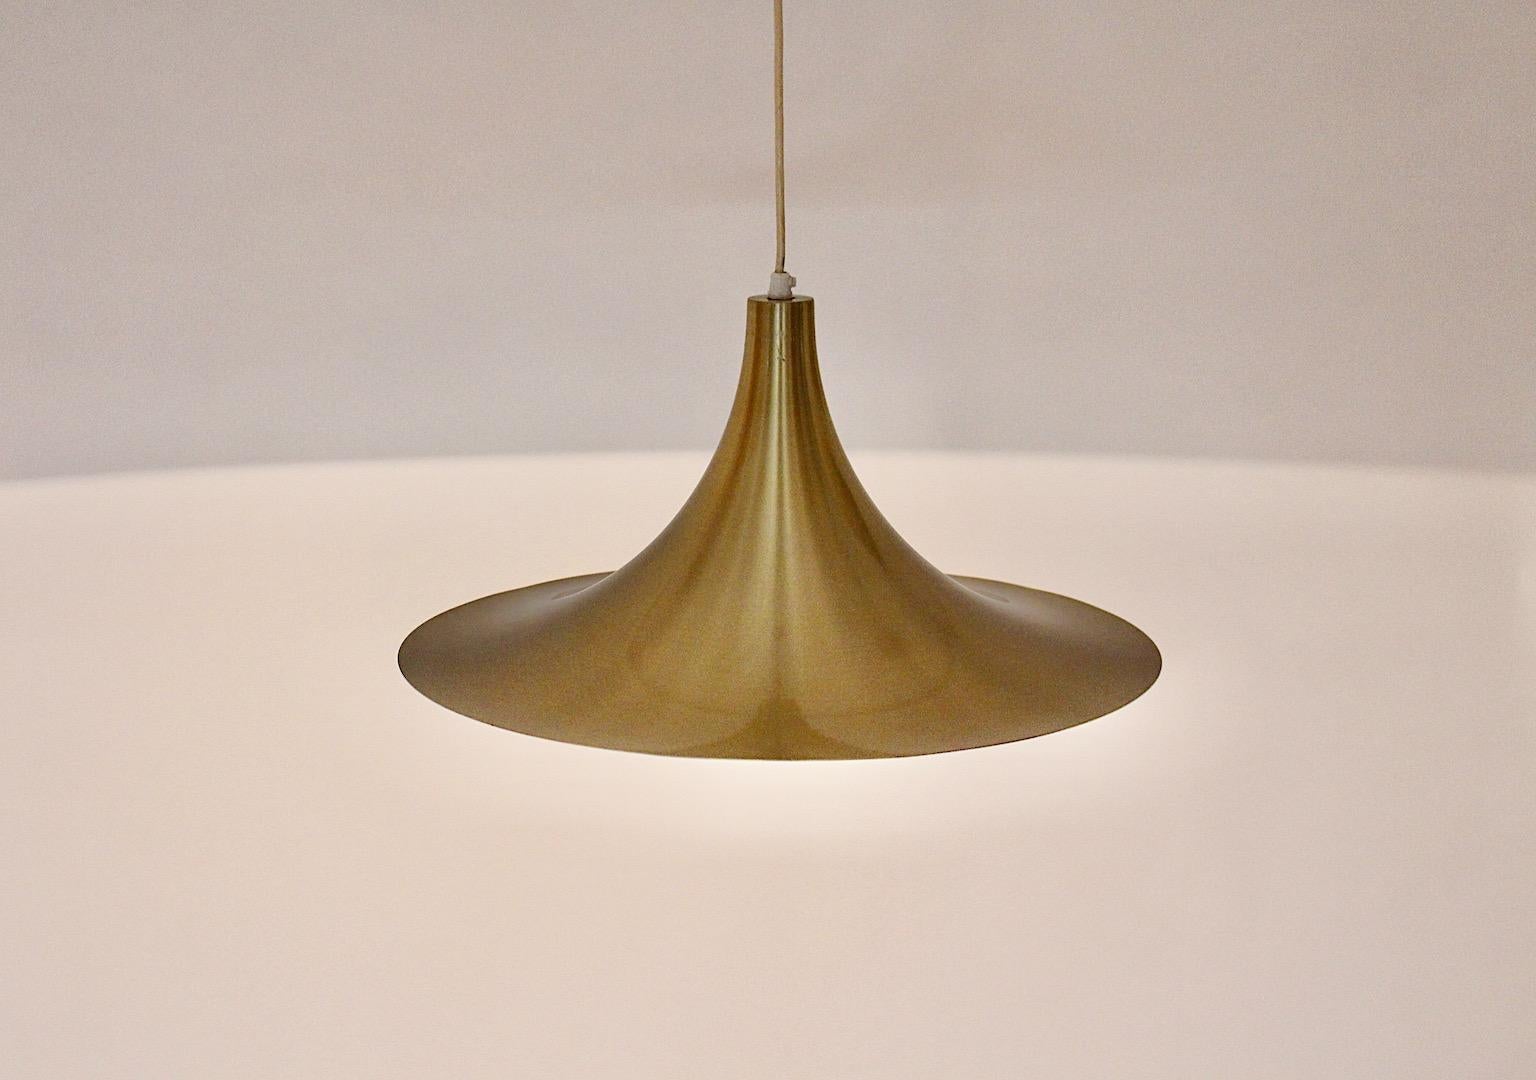 Scandinavian Modern vintage semi pendant from golden aluminum in trumpet like shape 1980s.
A stunning new arrival, the semi pendant in golden color from aluminum.
The pendant shows one E 27 socket, max. 100 W,  and white color inside. Through the